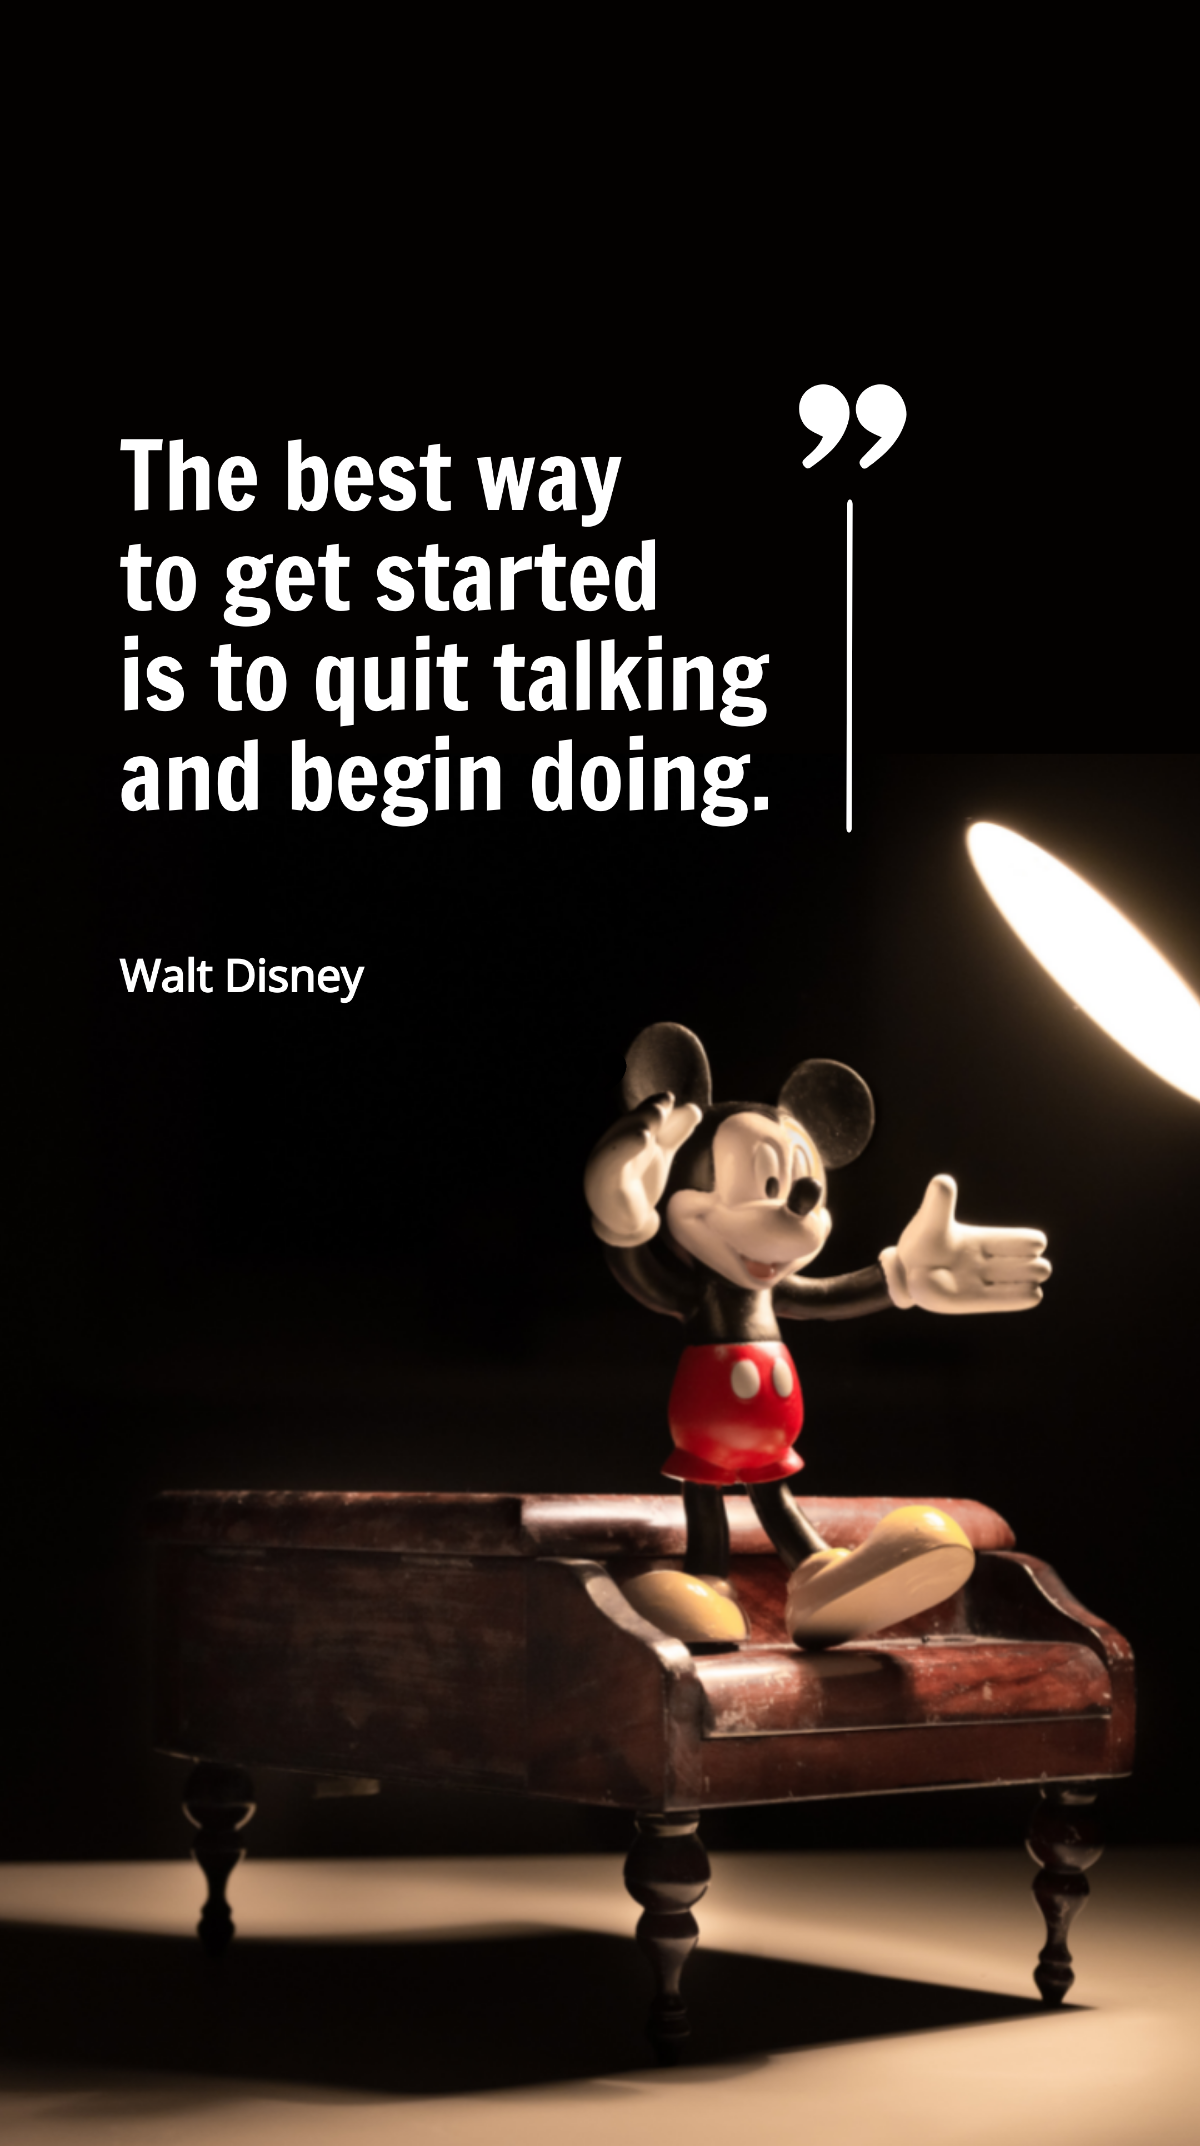 Walt Disney - The best way to get started is to quit talking and begin doing Template